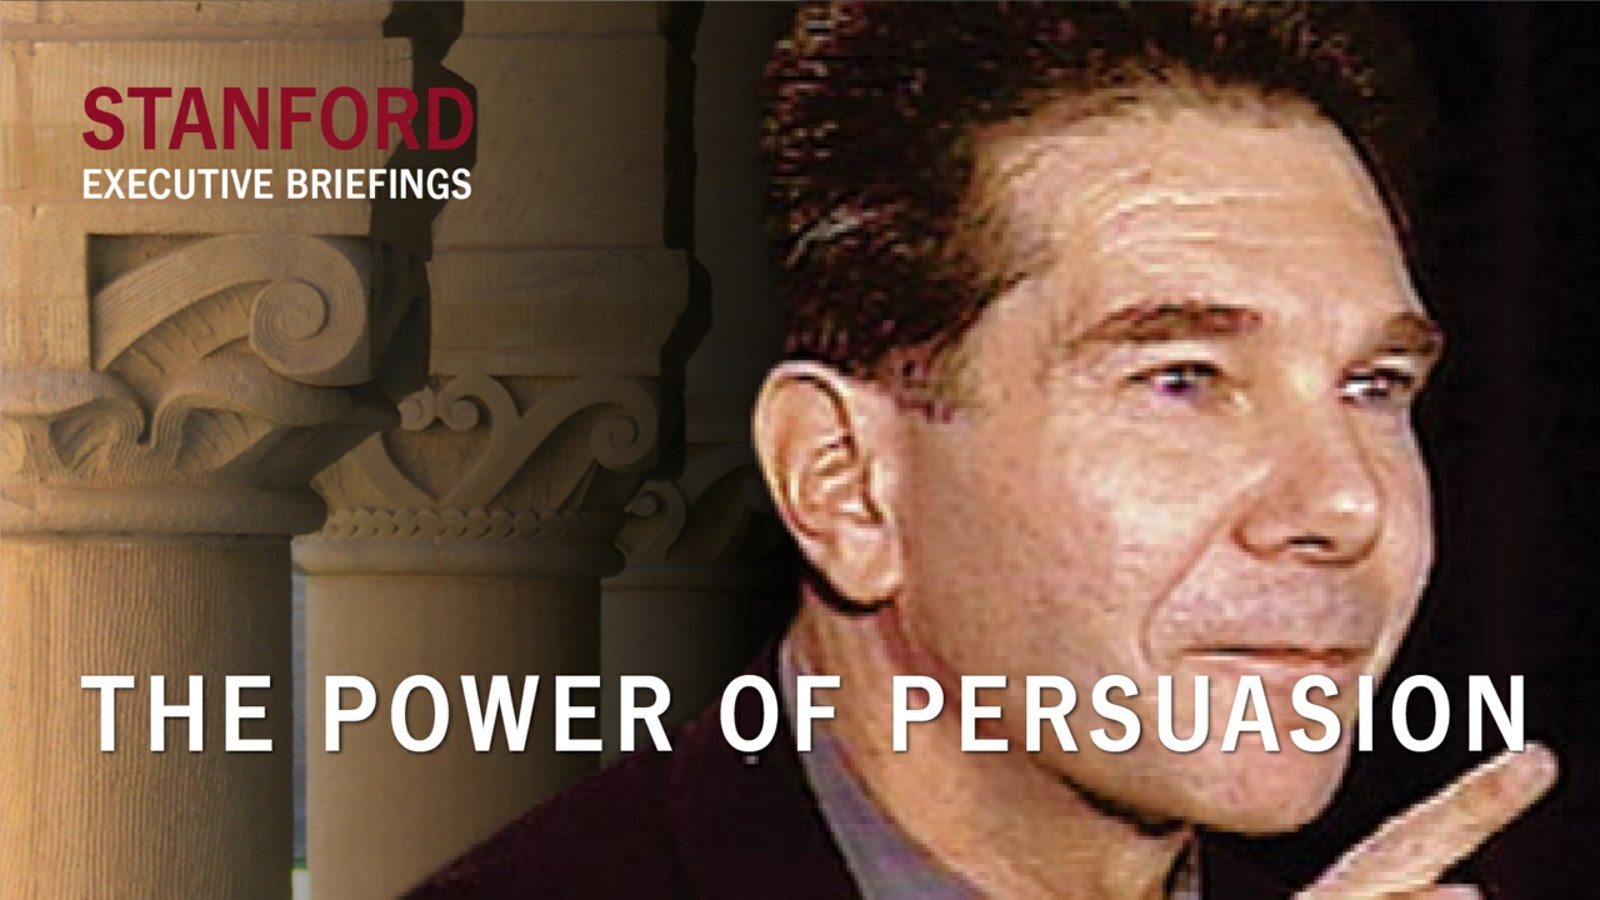 The Power of Persuasion by Robert Cialdini